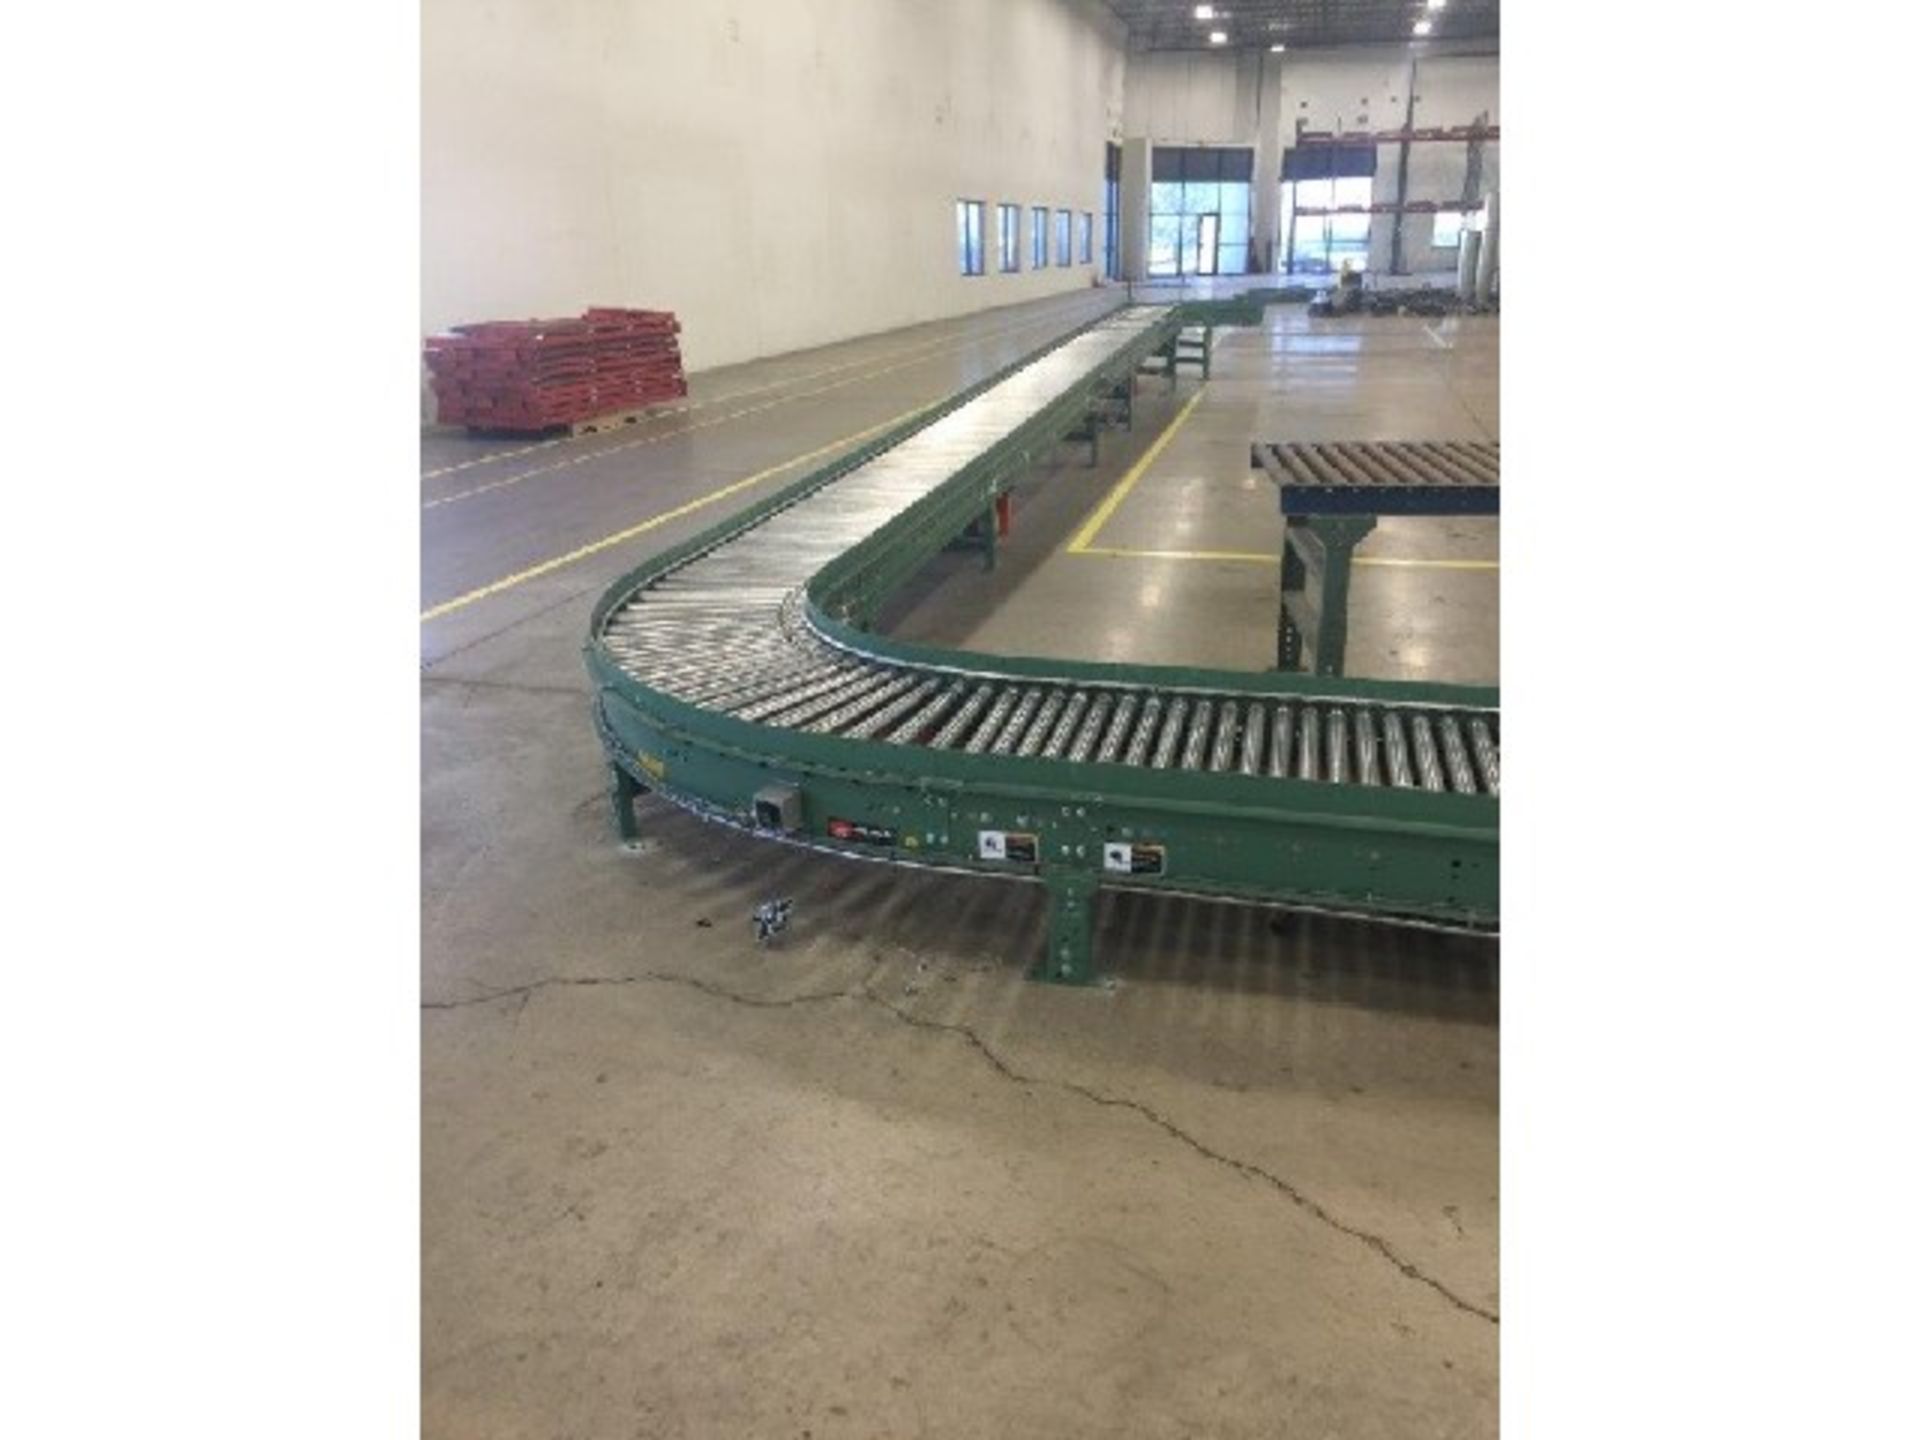 24” W Roach Motorized Conveyor System, 240 Volts 3 Phase 30 AMP, 8 Long Straight Pieces (At 10' - Image 4 of 8